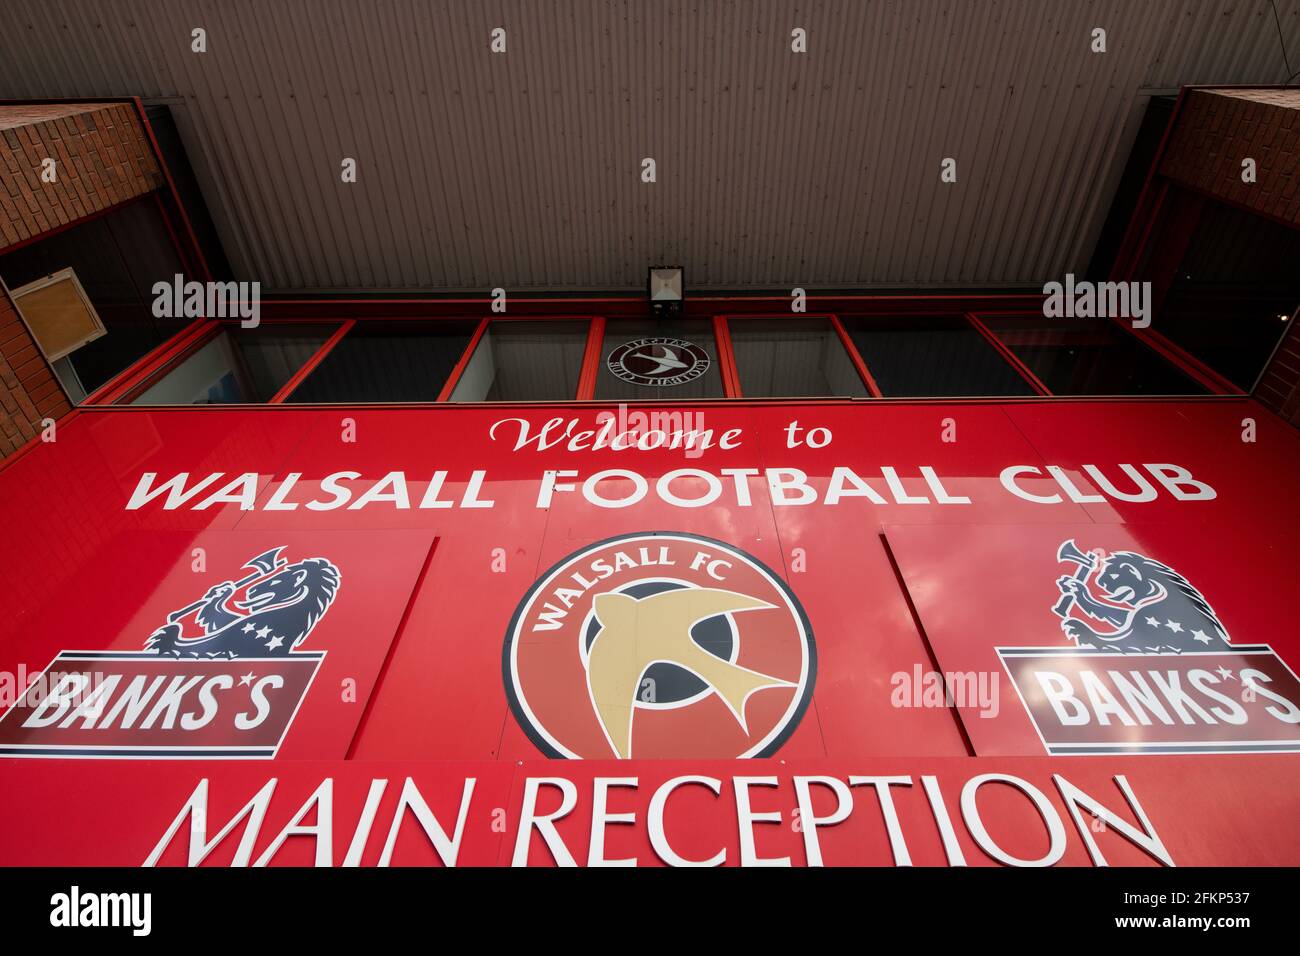 Bescot Stadium, also known as the Banks's Stadium. Walsall Football Club. Stock Photo